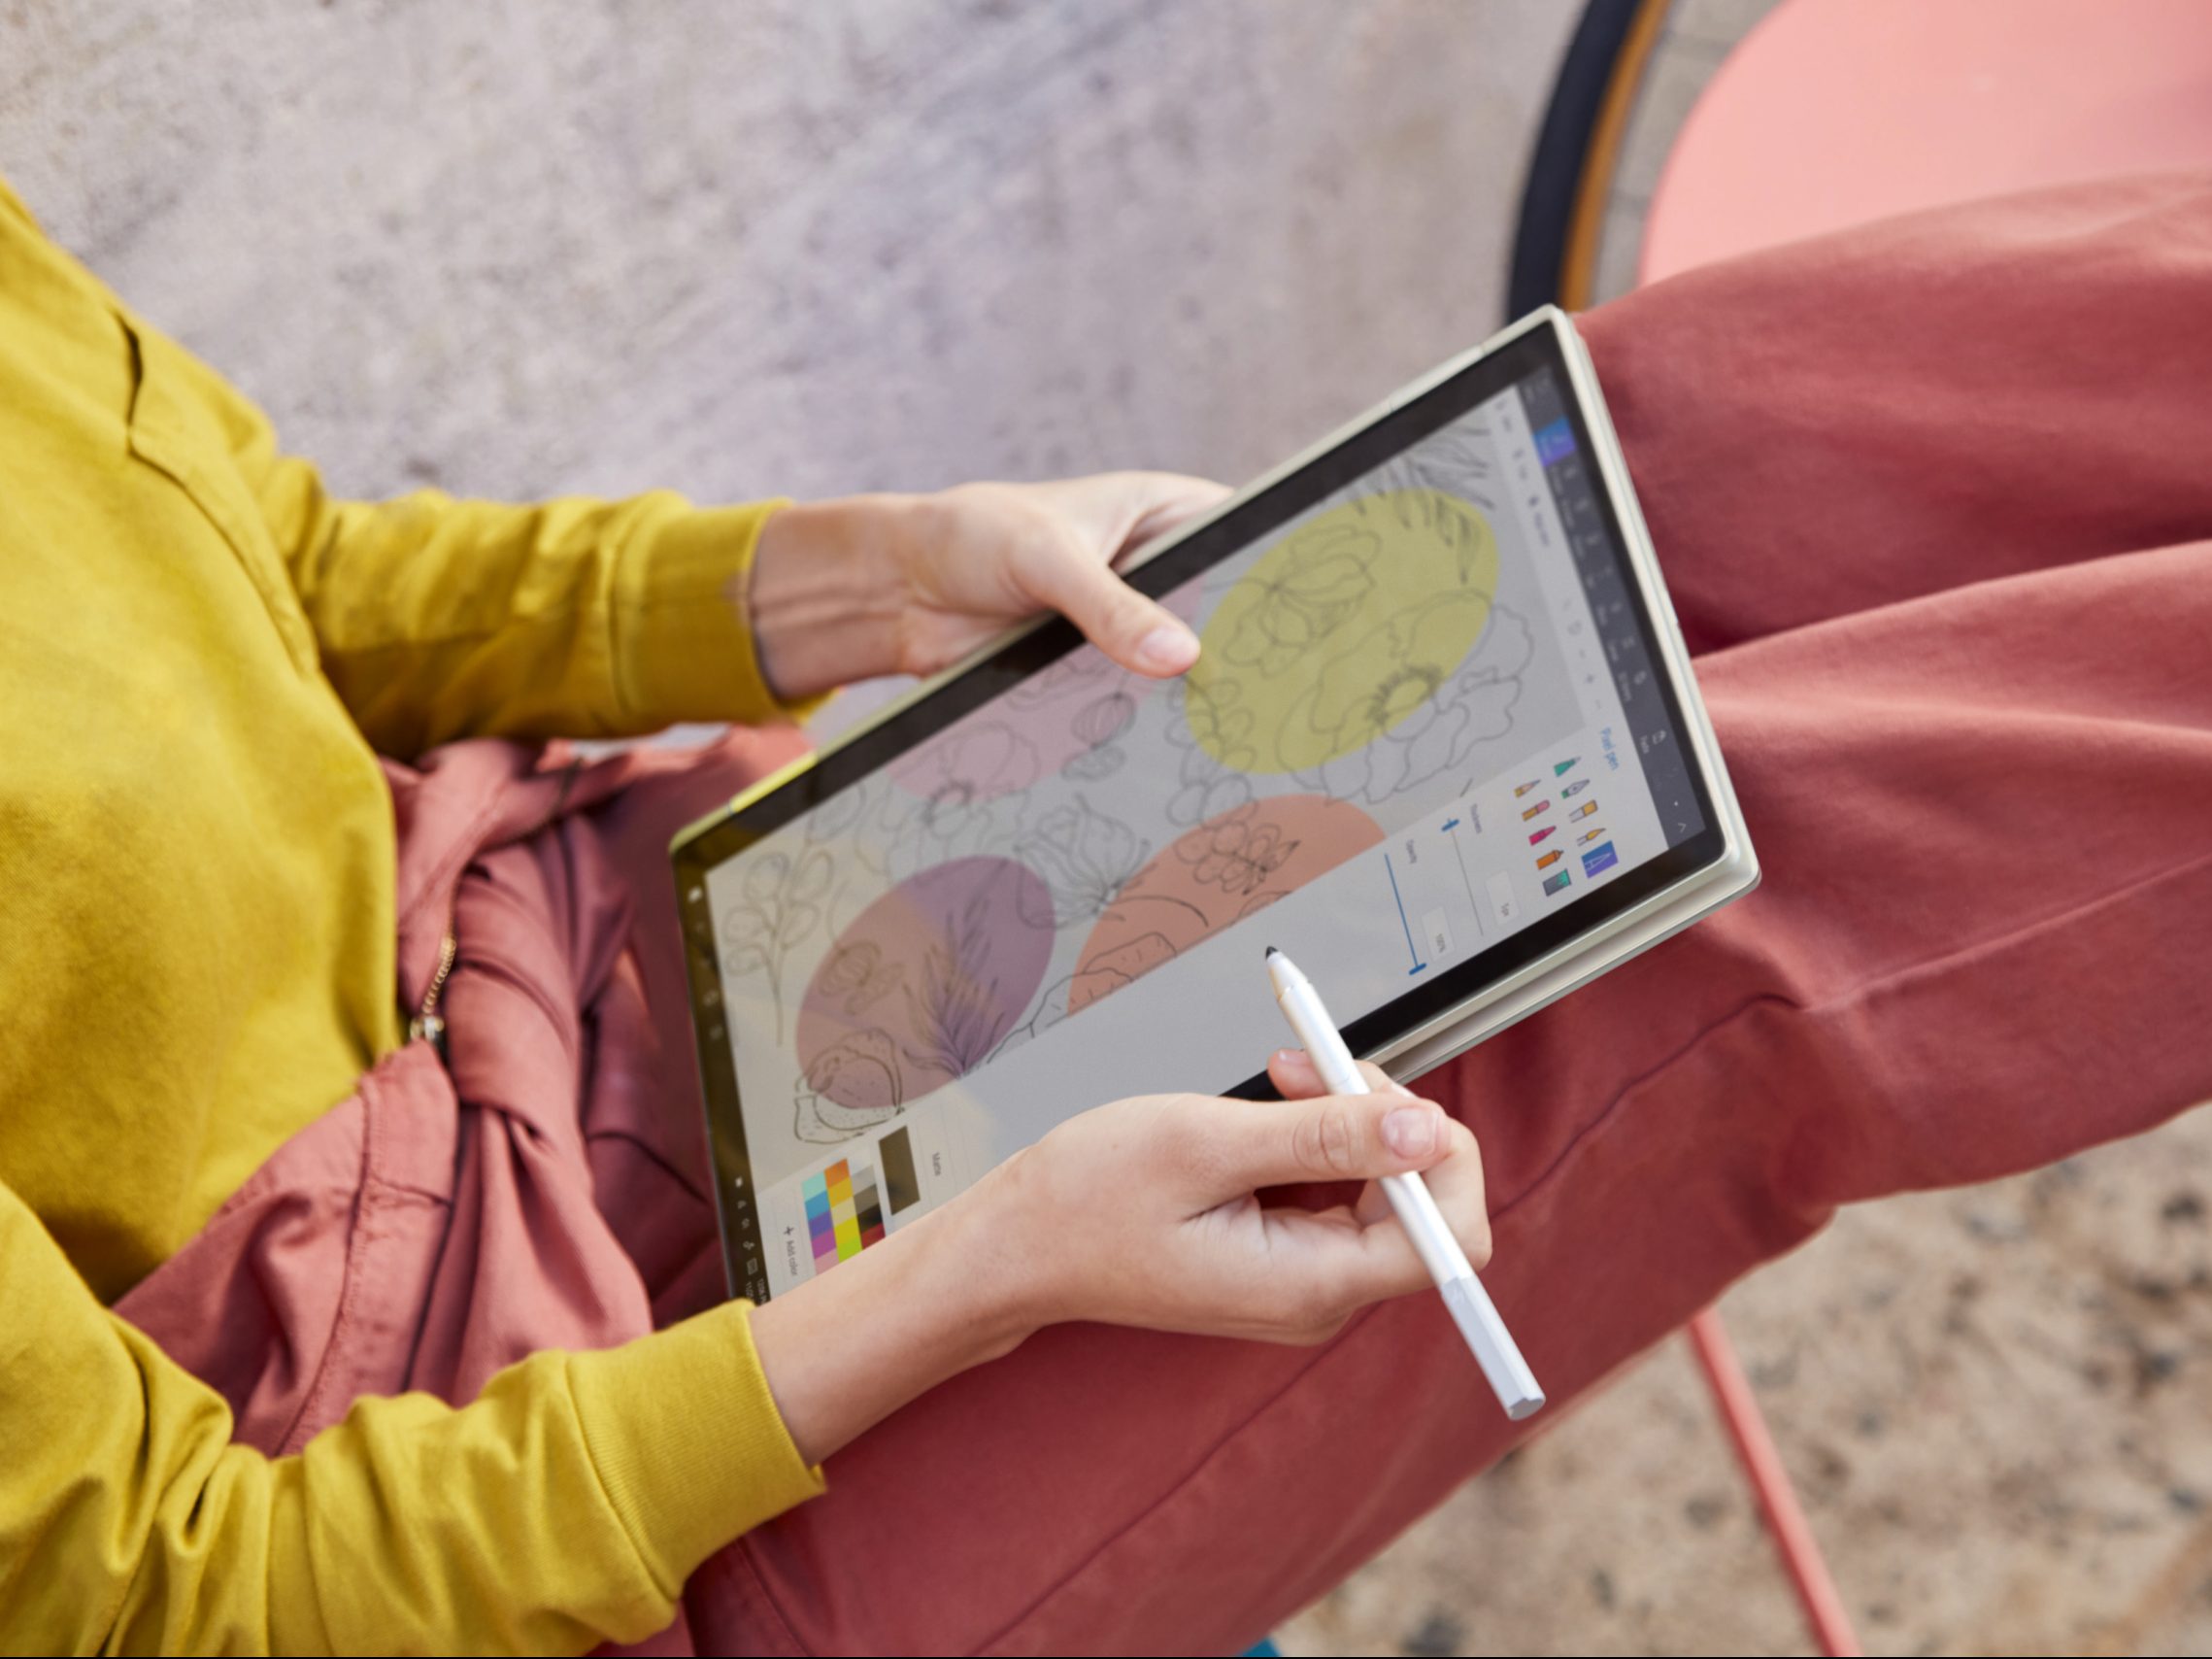 A woman using the HP Envy x360 13 2-in-1 in tablet mode.